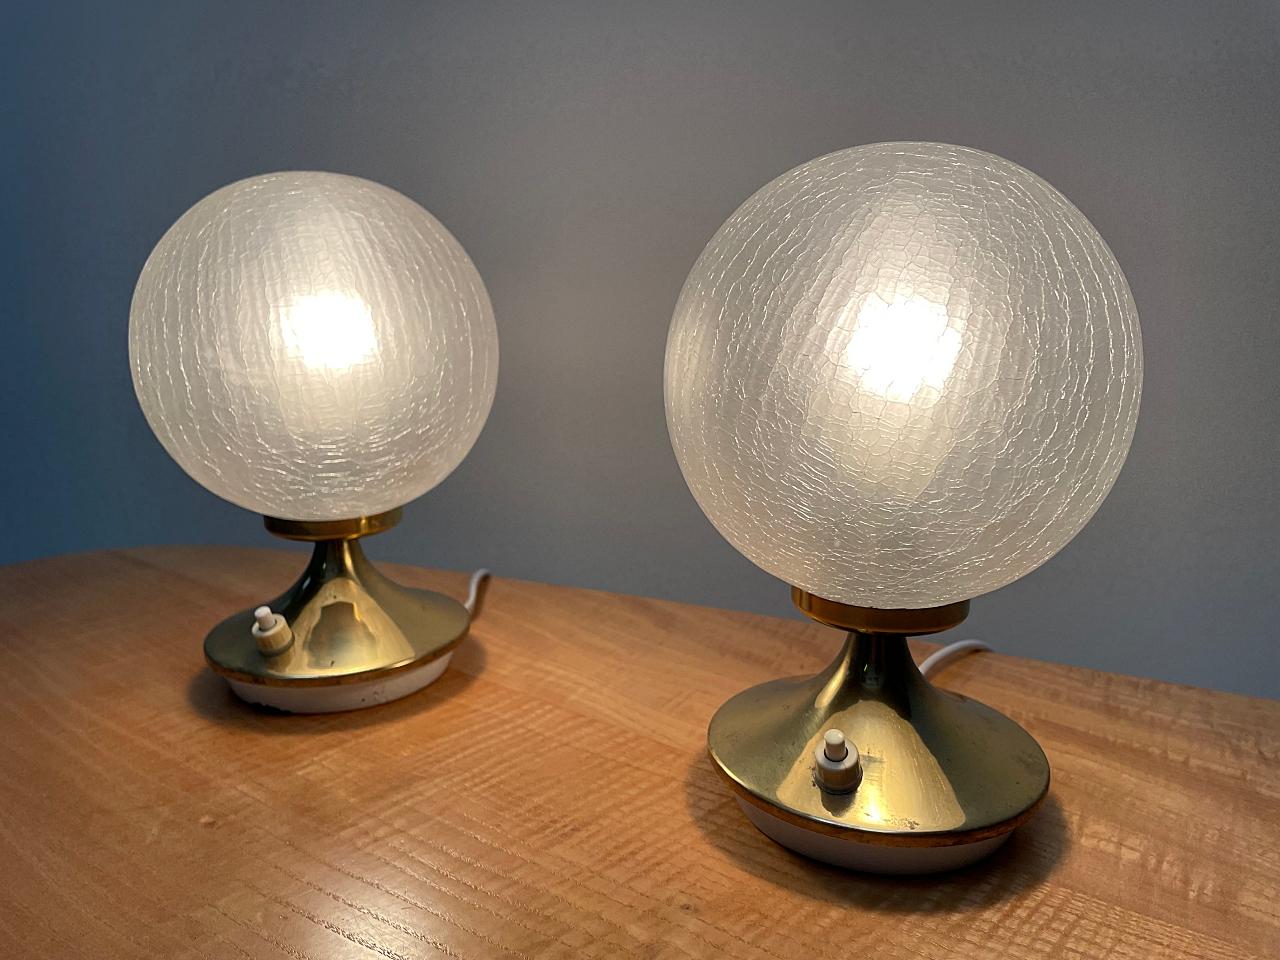 Metalwork DORIA Crackle Ice Glass & Polished Brass Globe Nightstand Lamps, 1960s, Germany For Sale